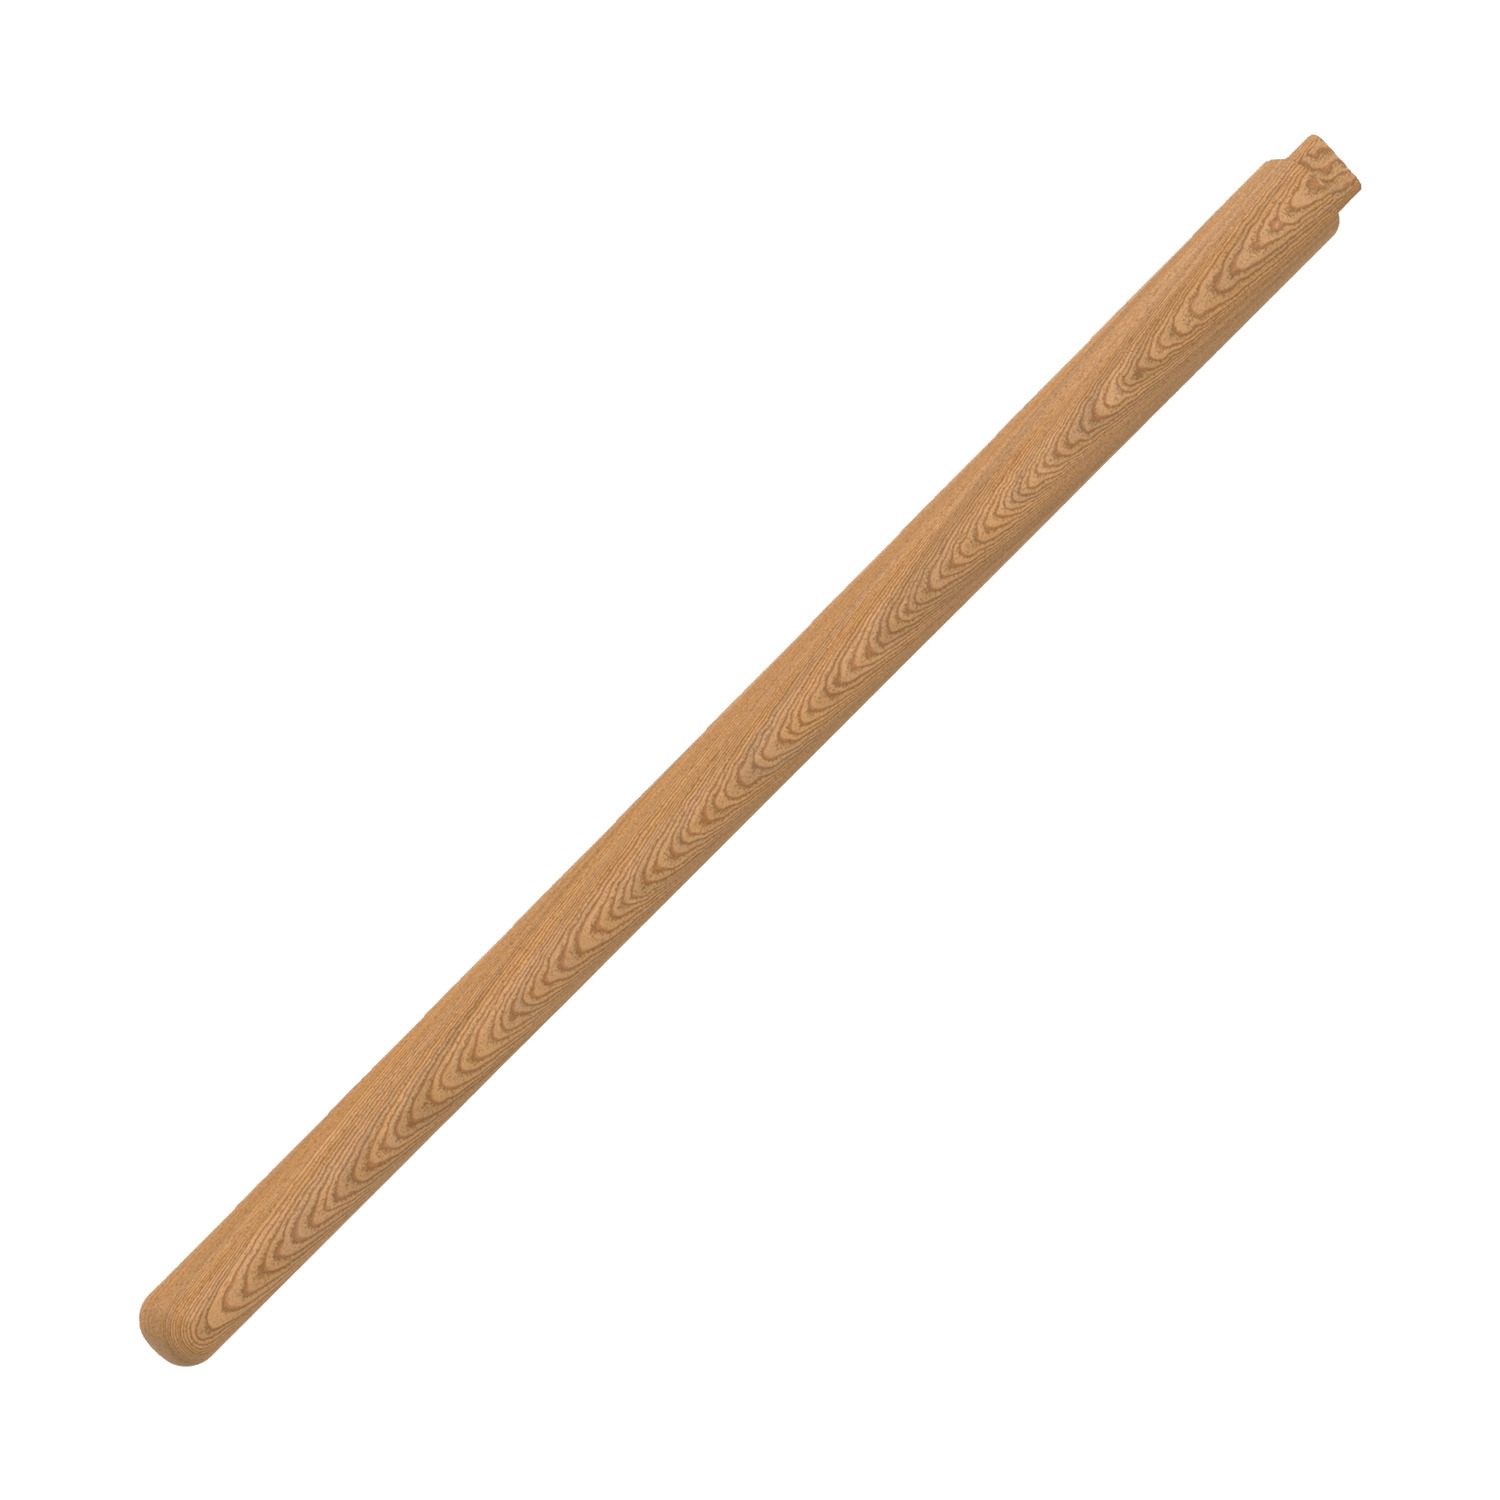 Product 98362, Handle - Non-Rebound Sledgehammer wood - for no. 98361 / 